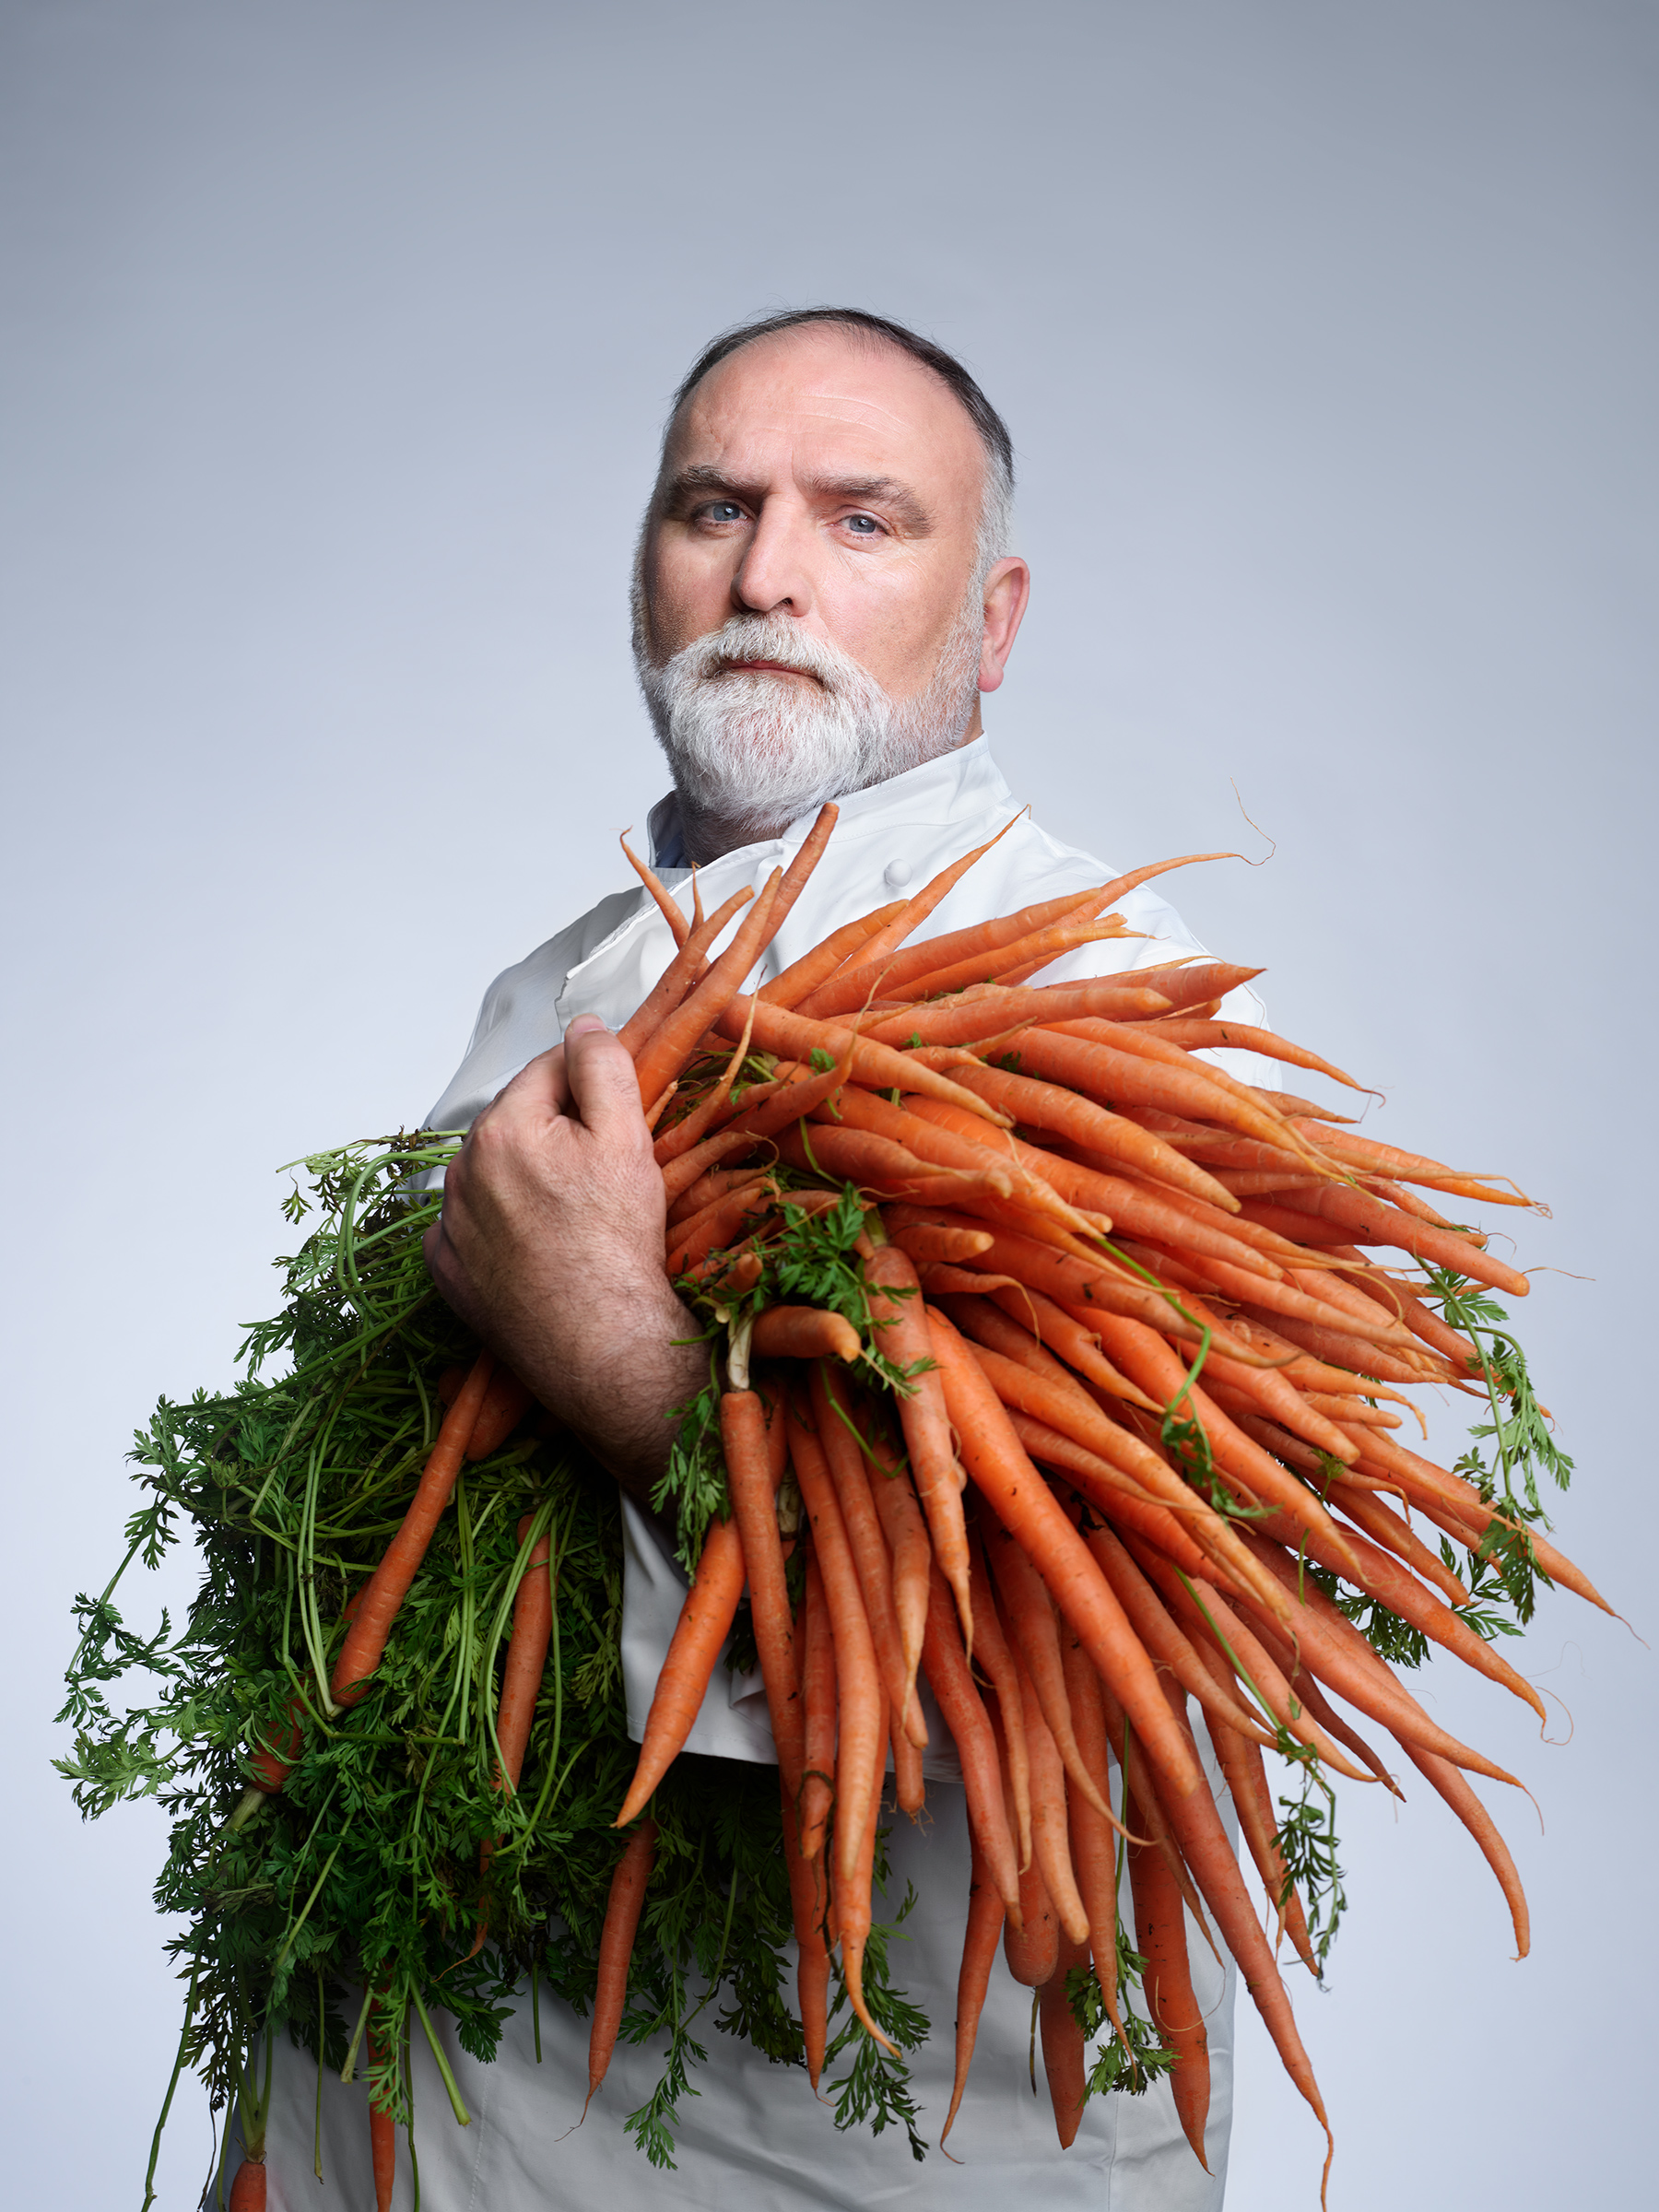 José Andres. "Chef on a Mission," April 6-13 issue.